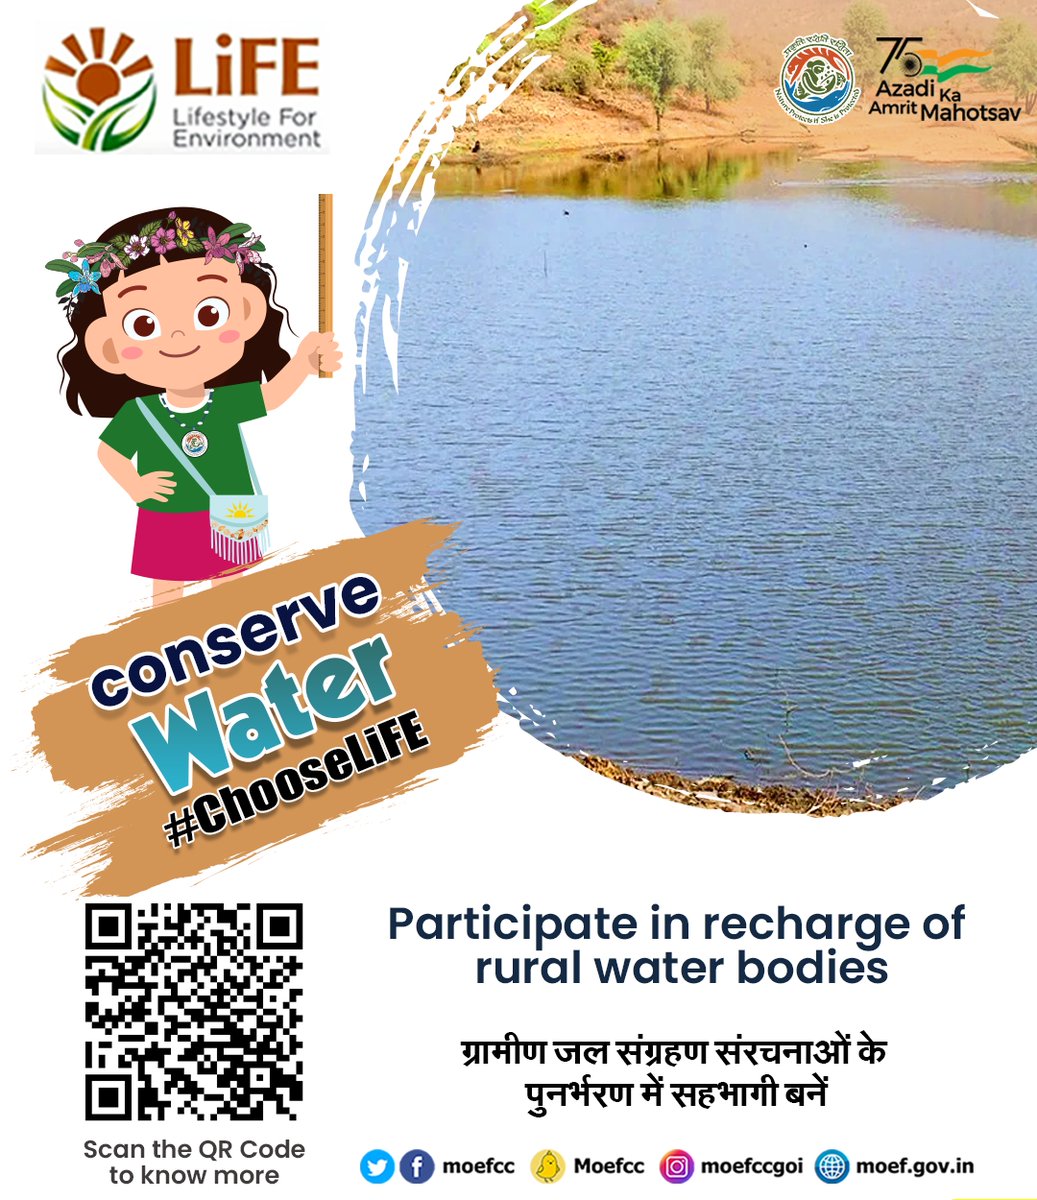 Participate in recharge of Rural Water bodies..

#MissionLiFE #ChooseLife #ConserveWater #LiFE